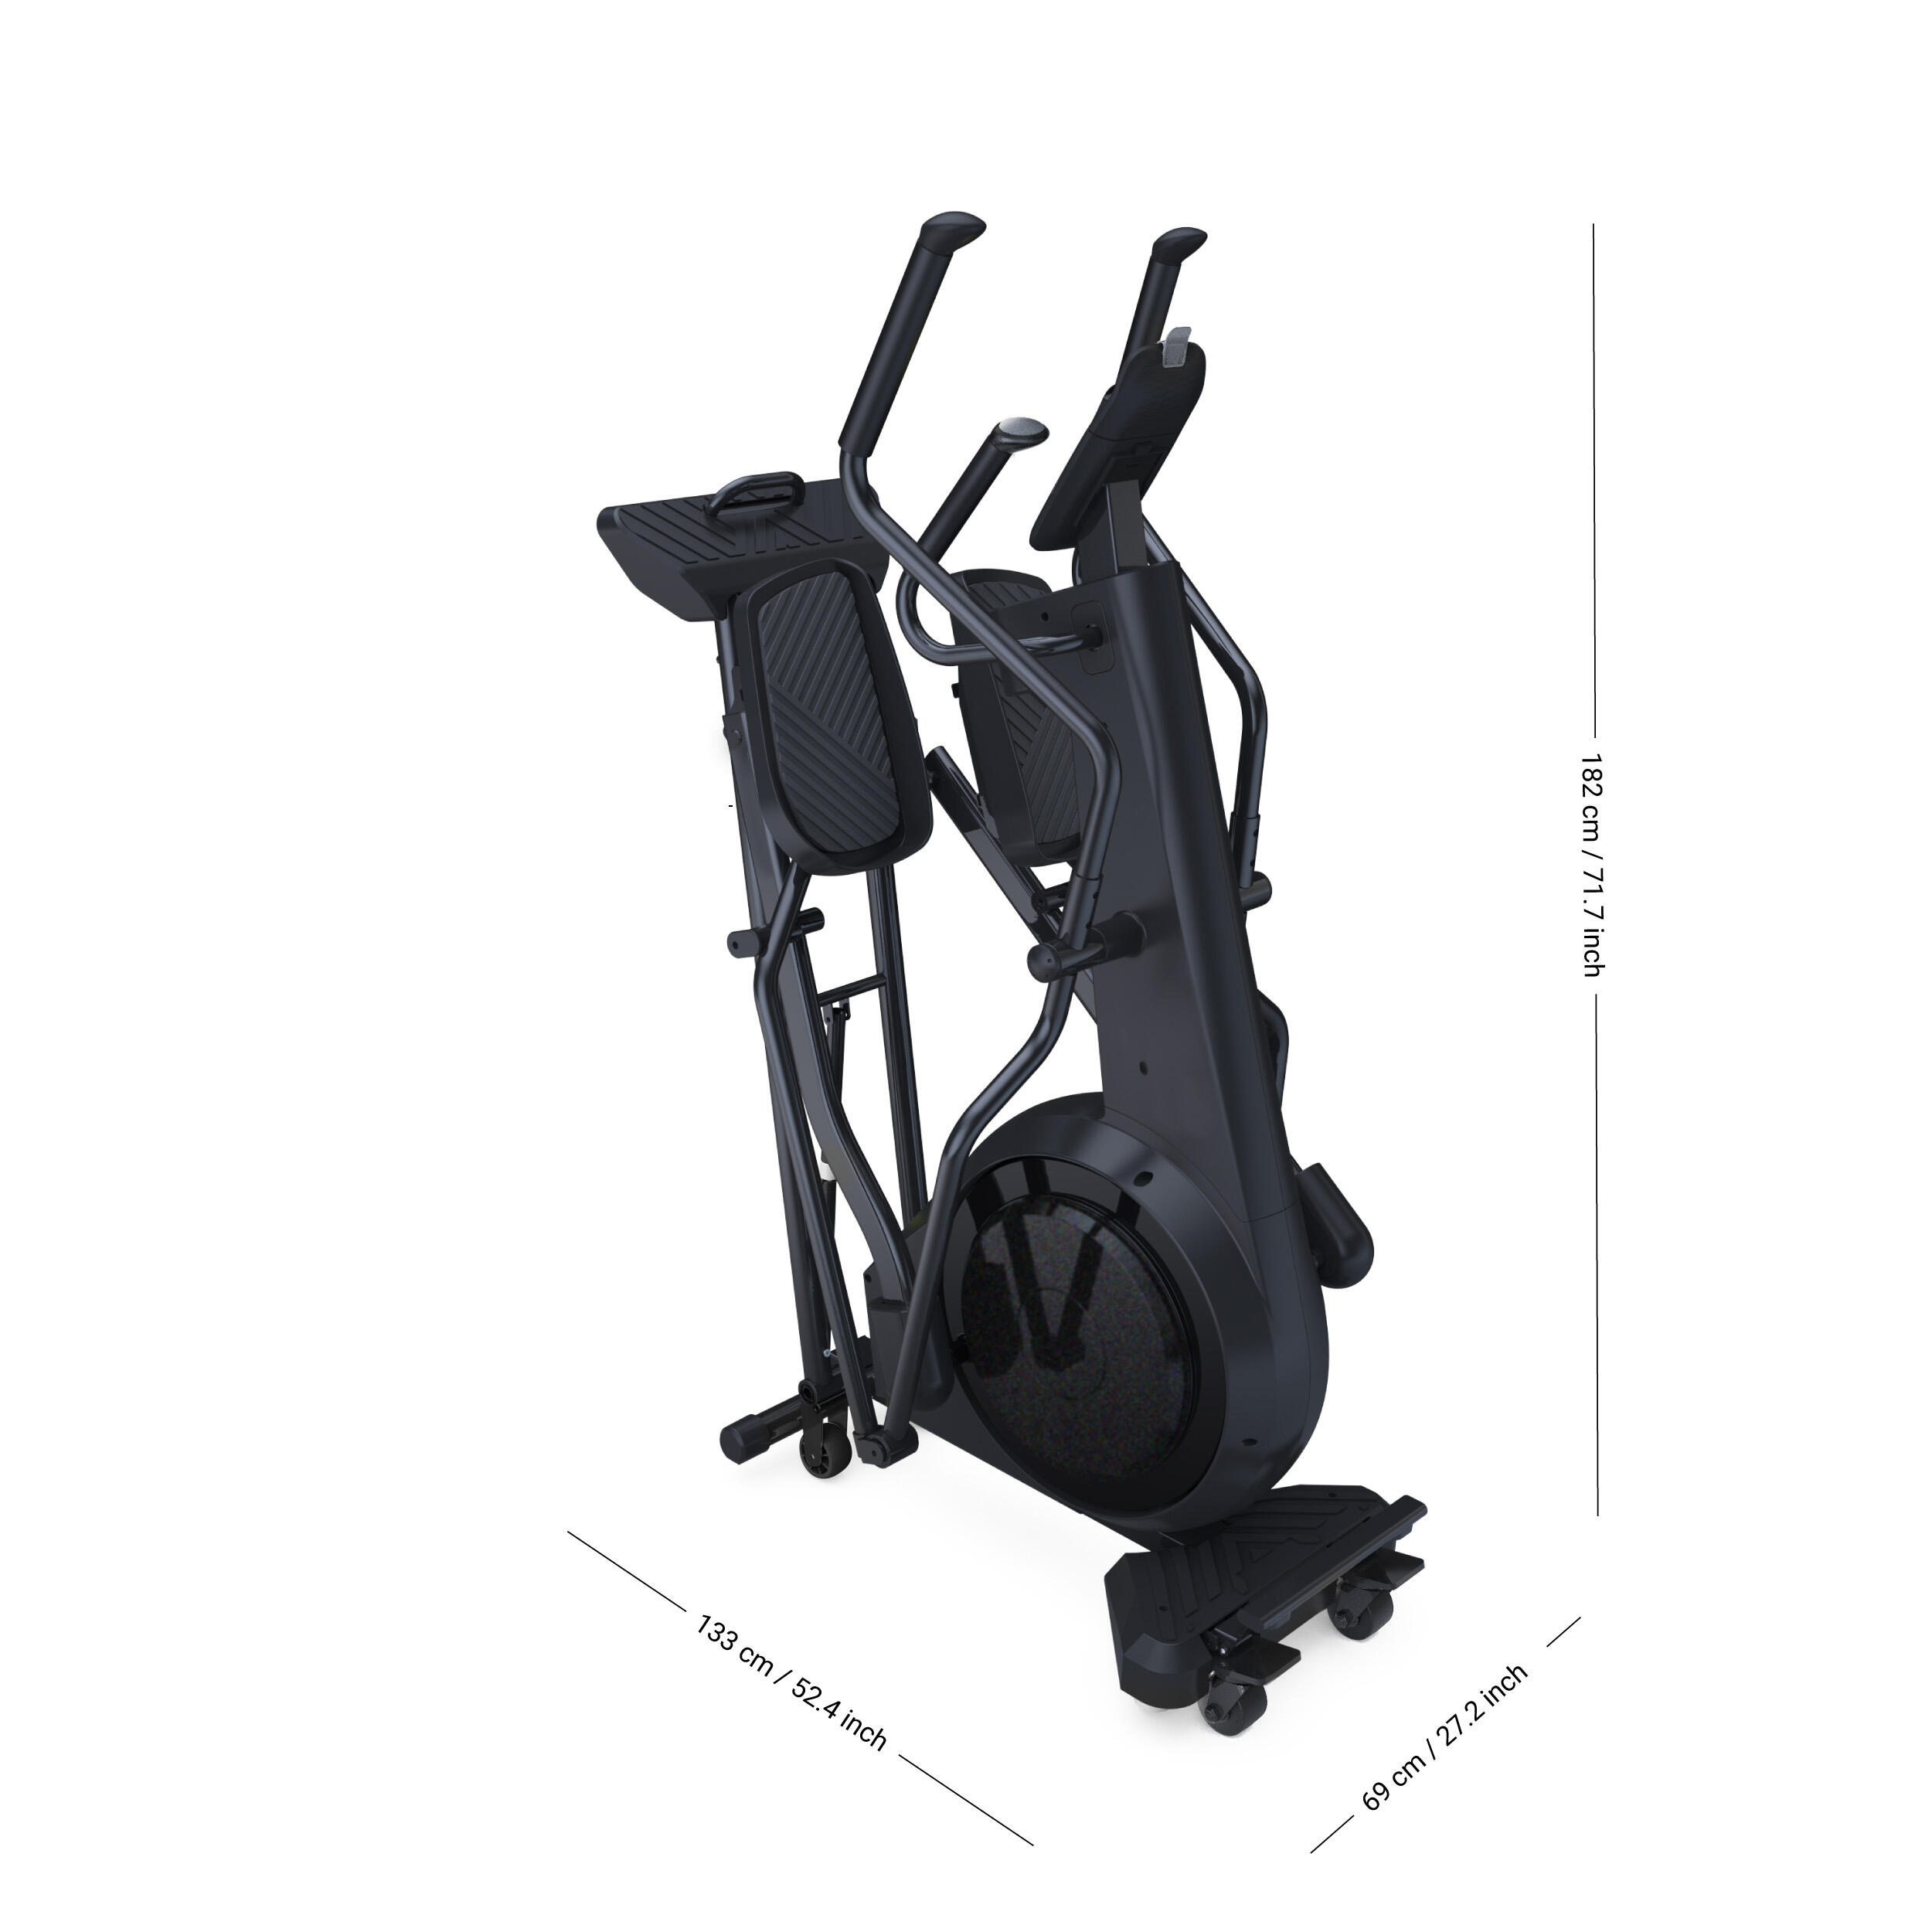 Front Wheel Folding Connected Self-Powered Cross Trainer Challenge Elliptical 4/6